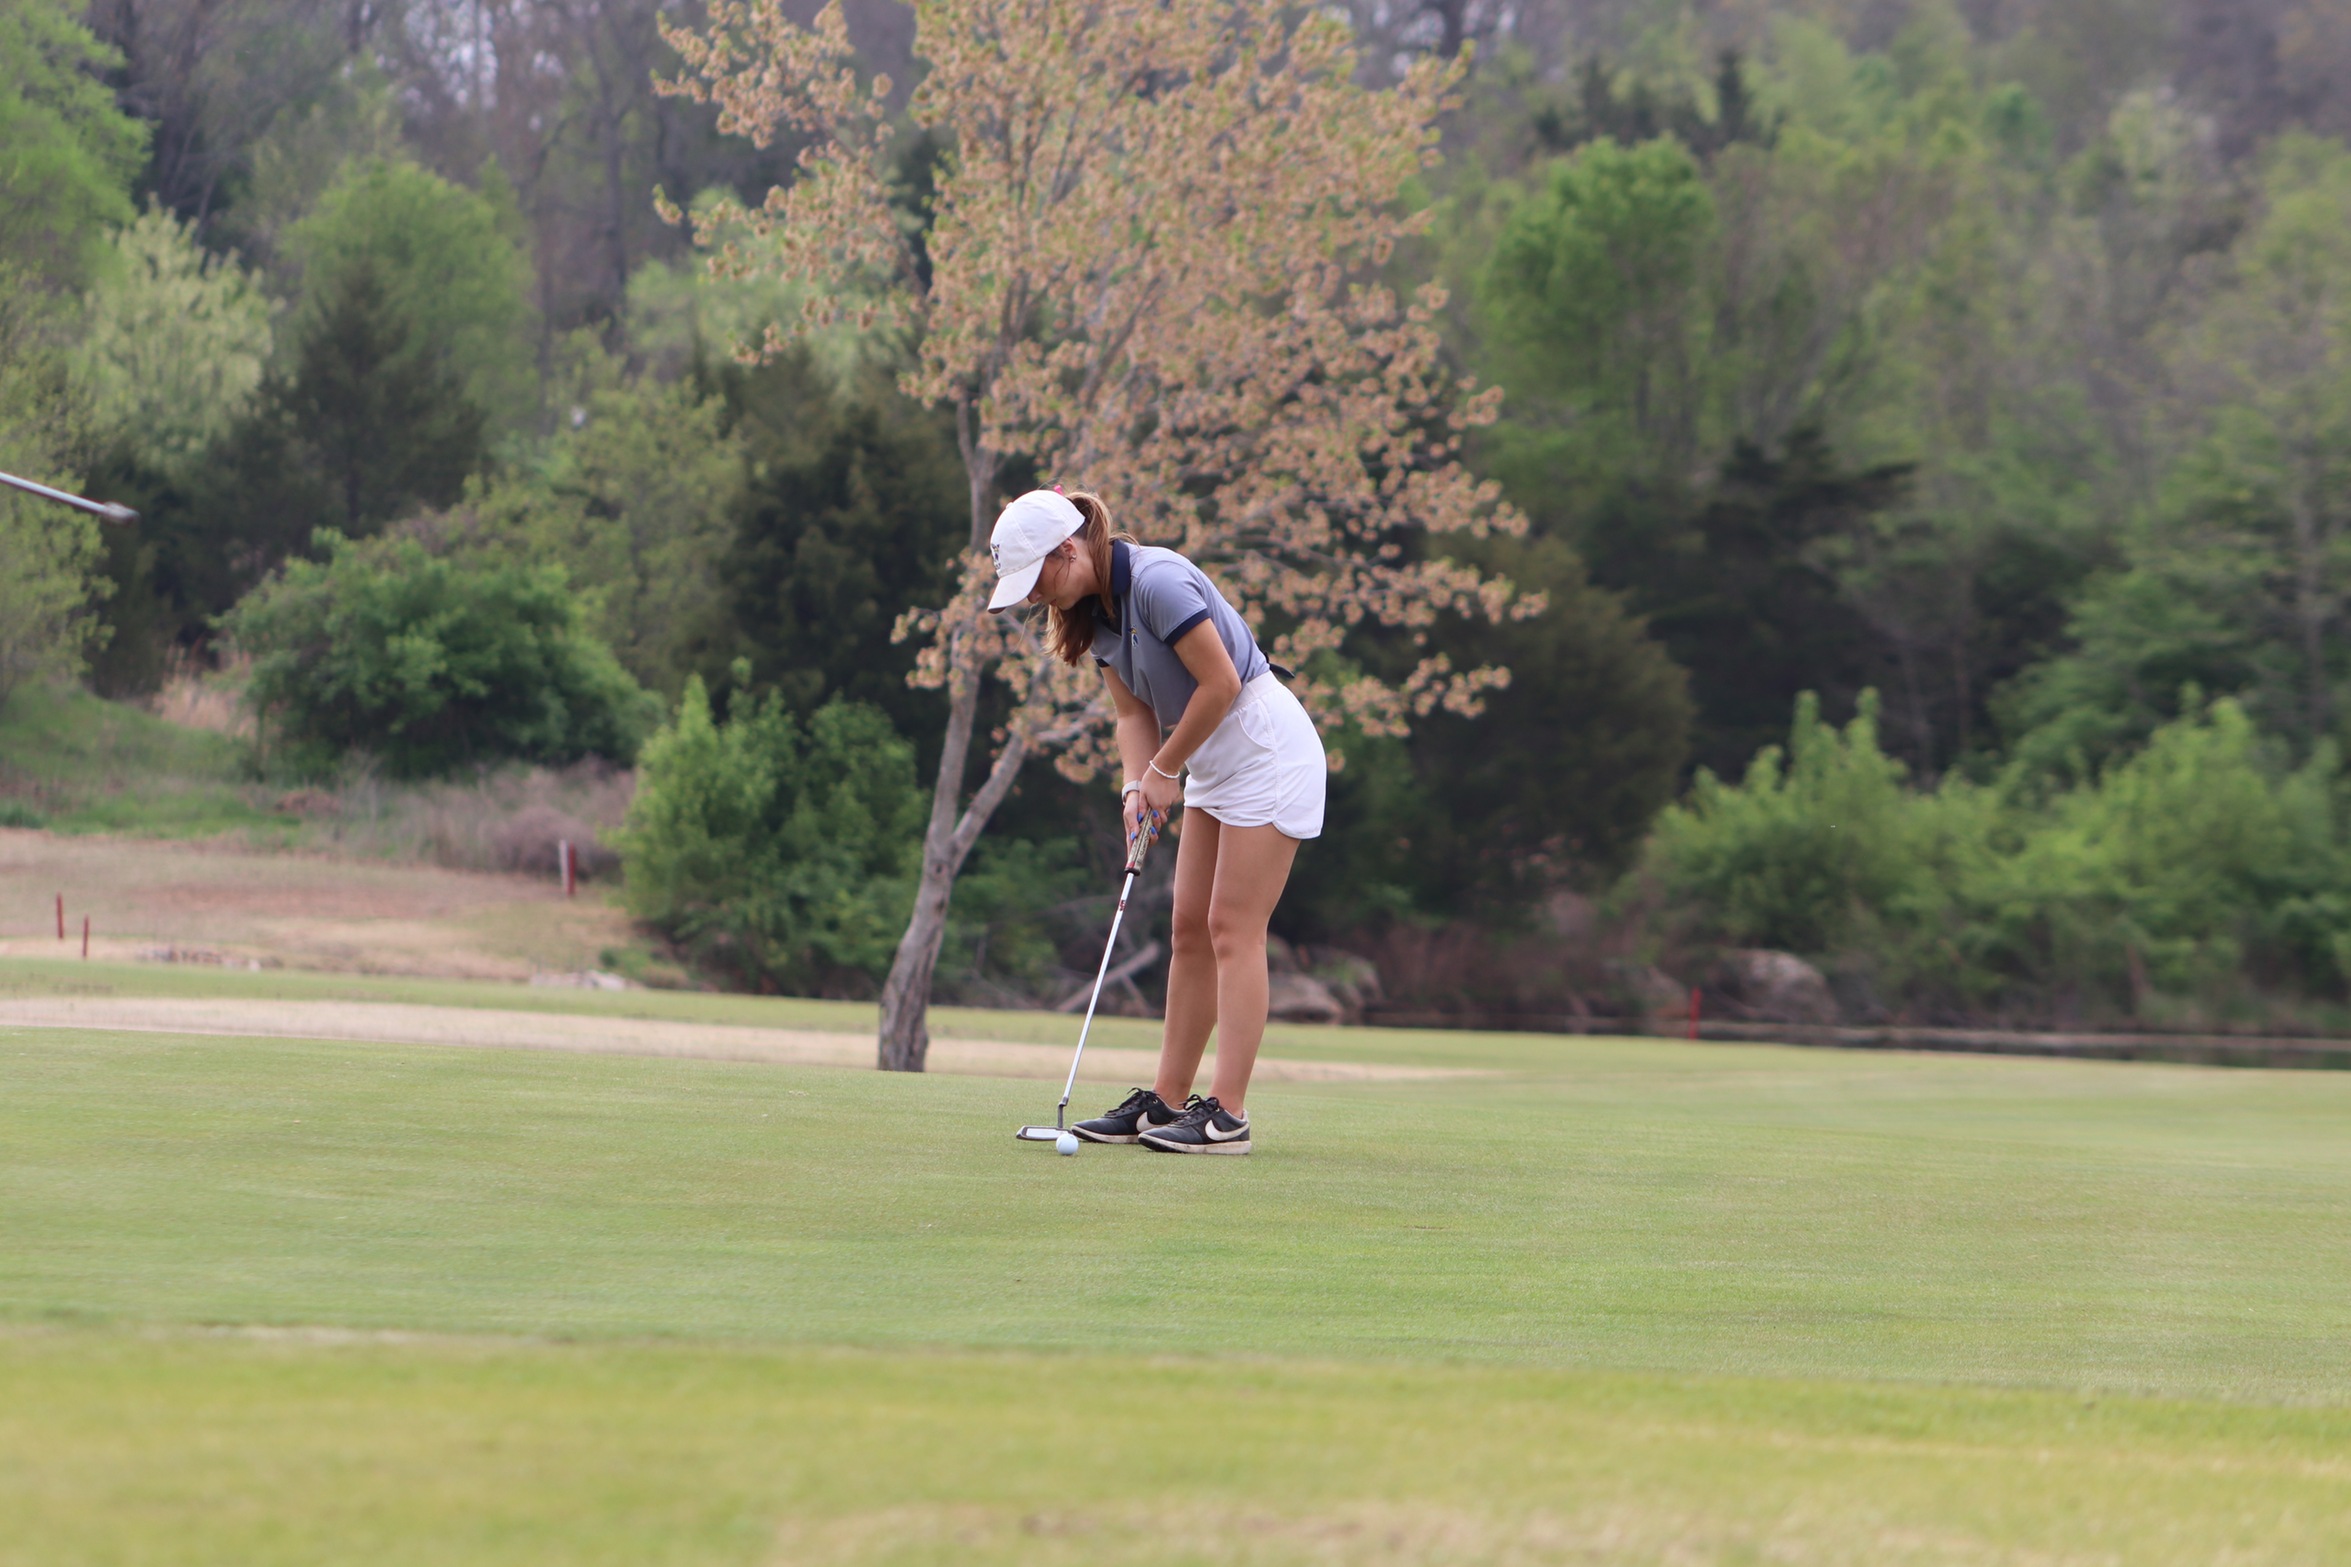 DeLange's Strong Showing Leads the Way at Missouri Baptist Spring Invitational